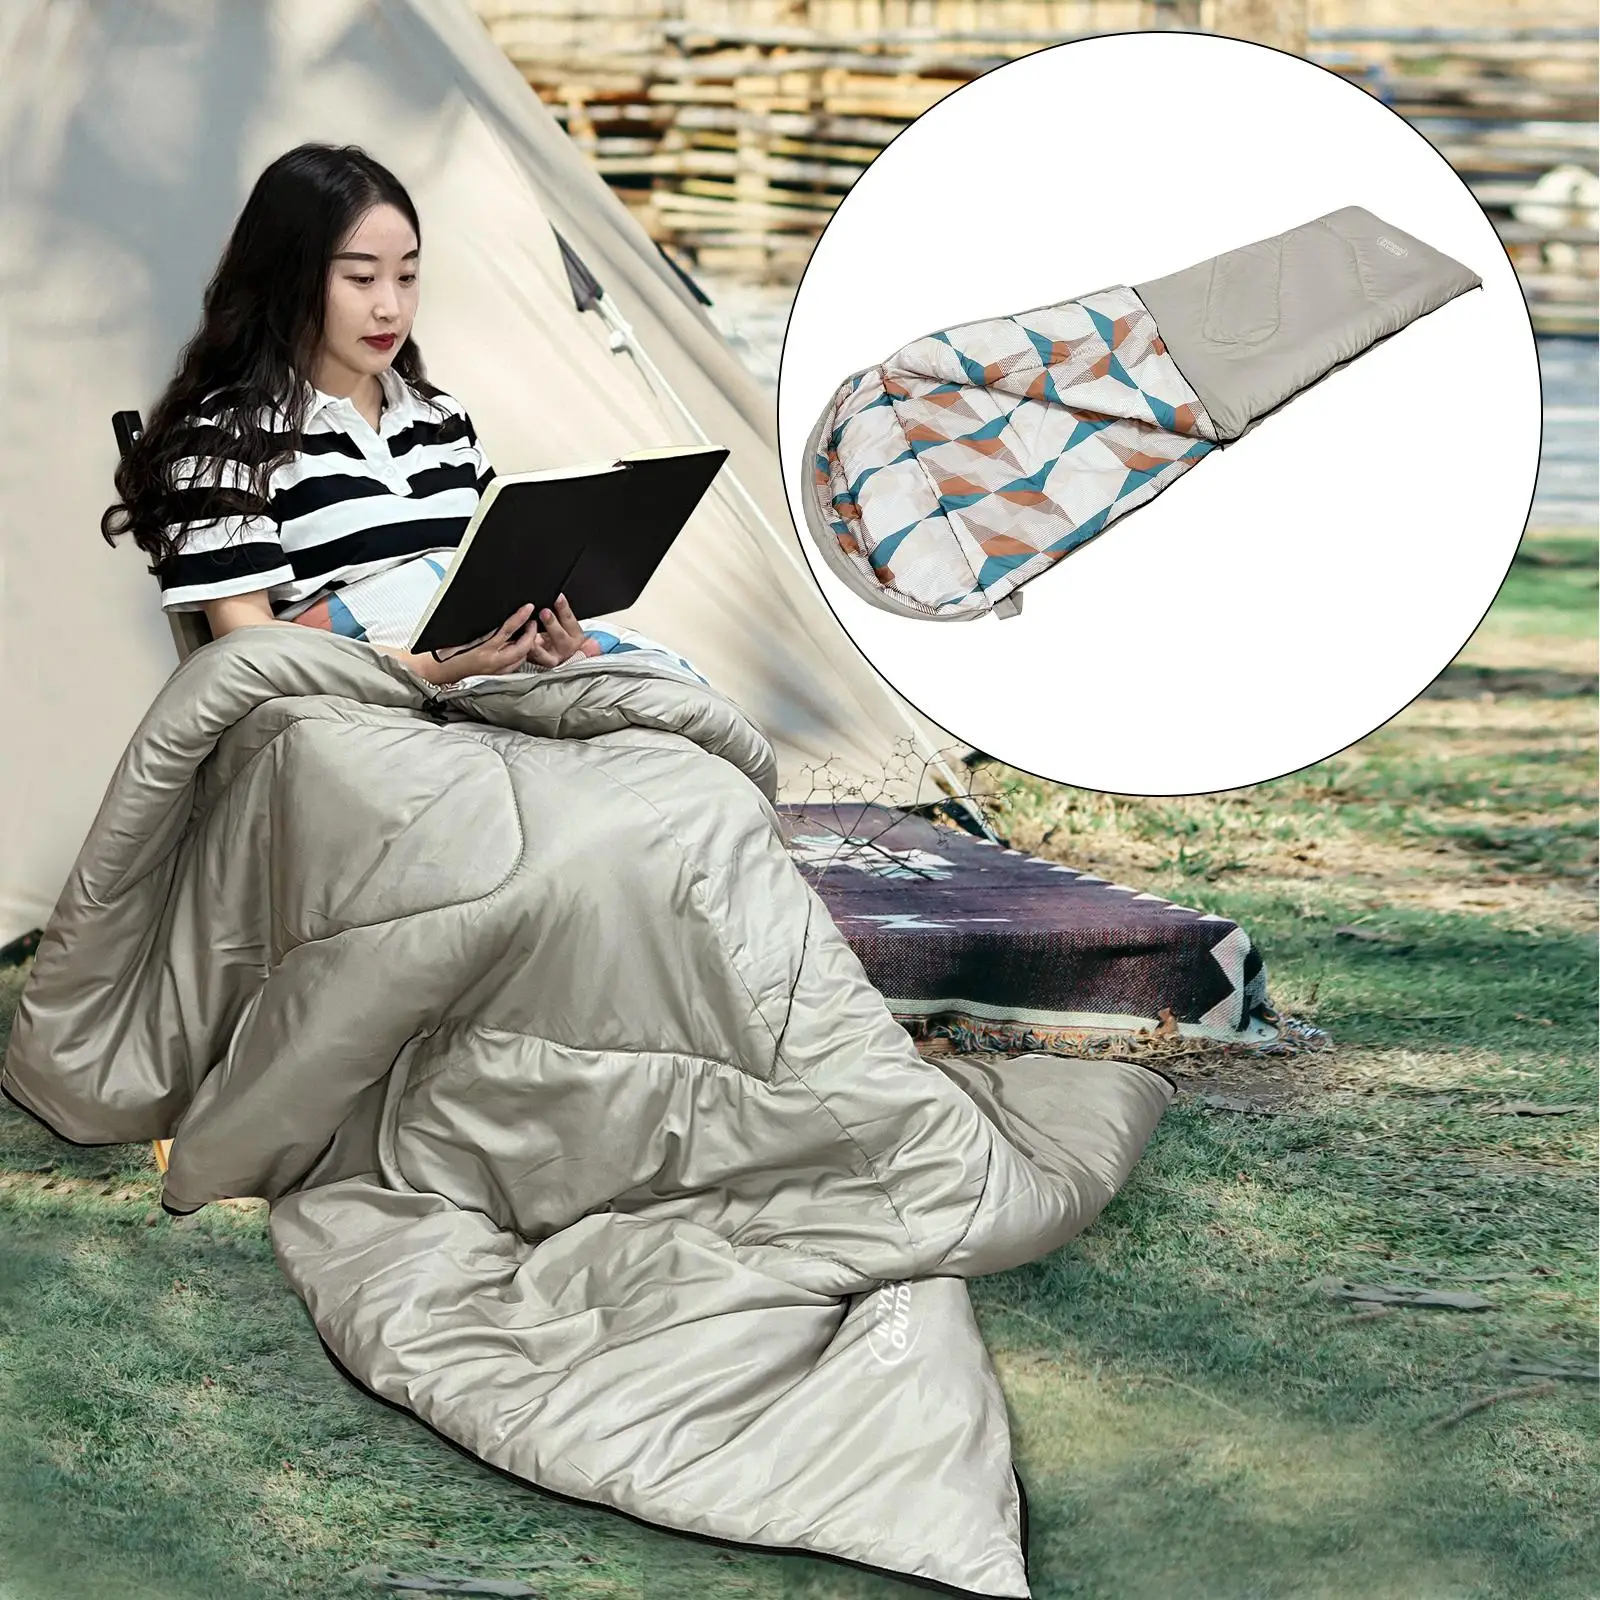 Portable Sleeping bag Warm Survival Thermal Comfortable Polyester for Women Cold Weather Hiking Mountaineering Camping